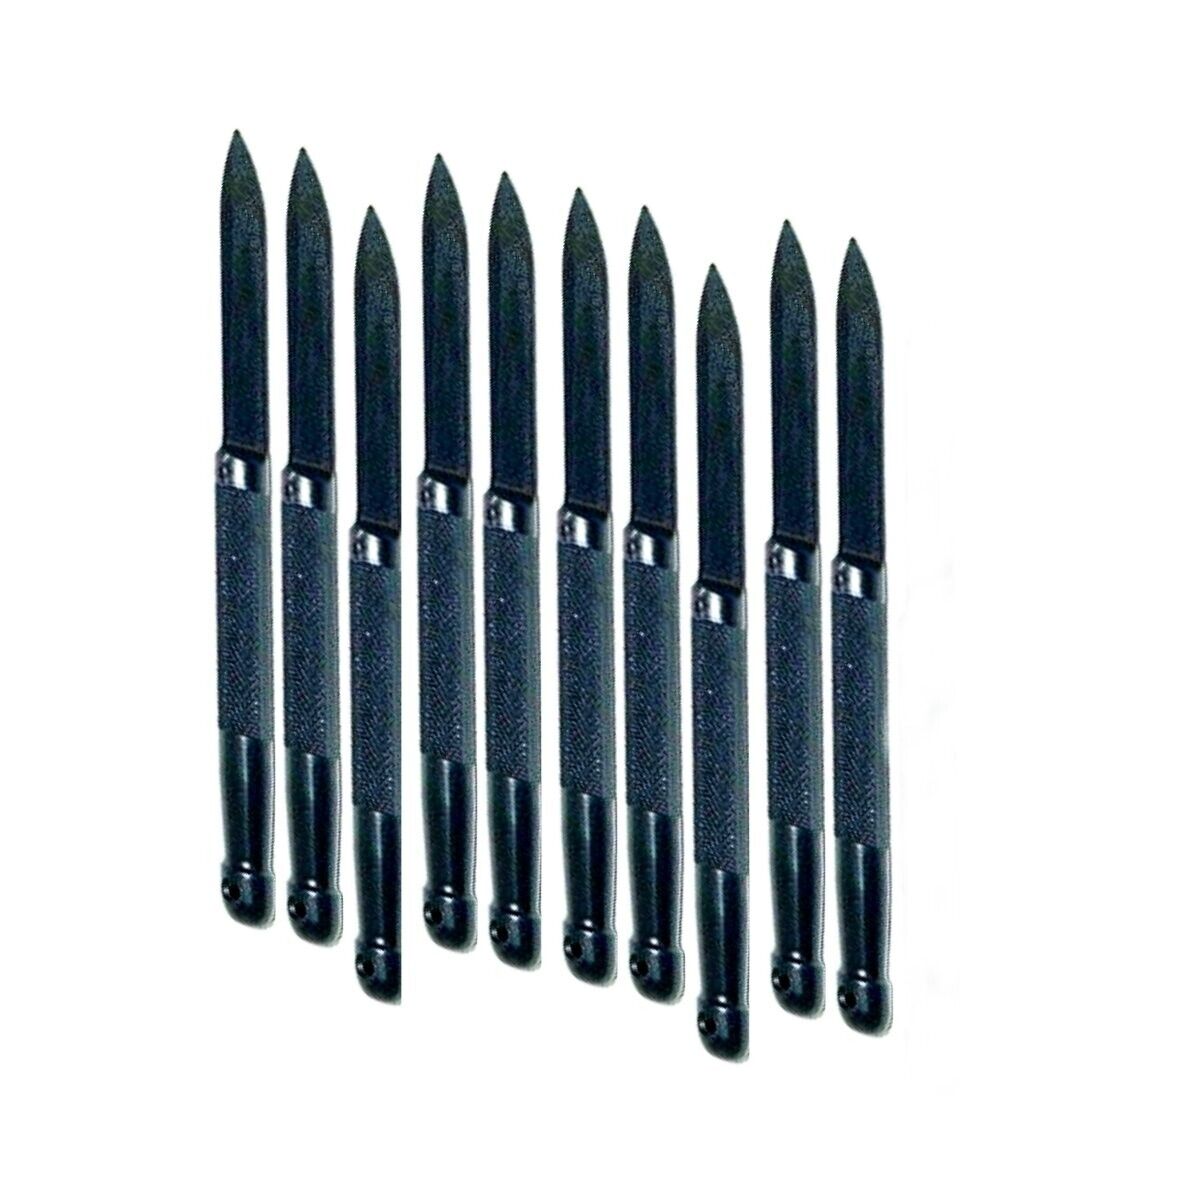 10 Tactical Spike NonMetallic Resin Undetectable by Metal Detectors